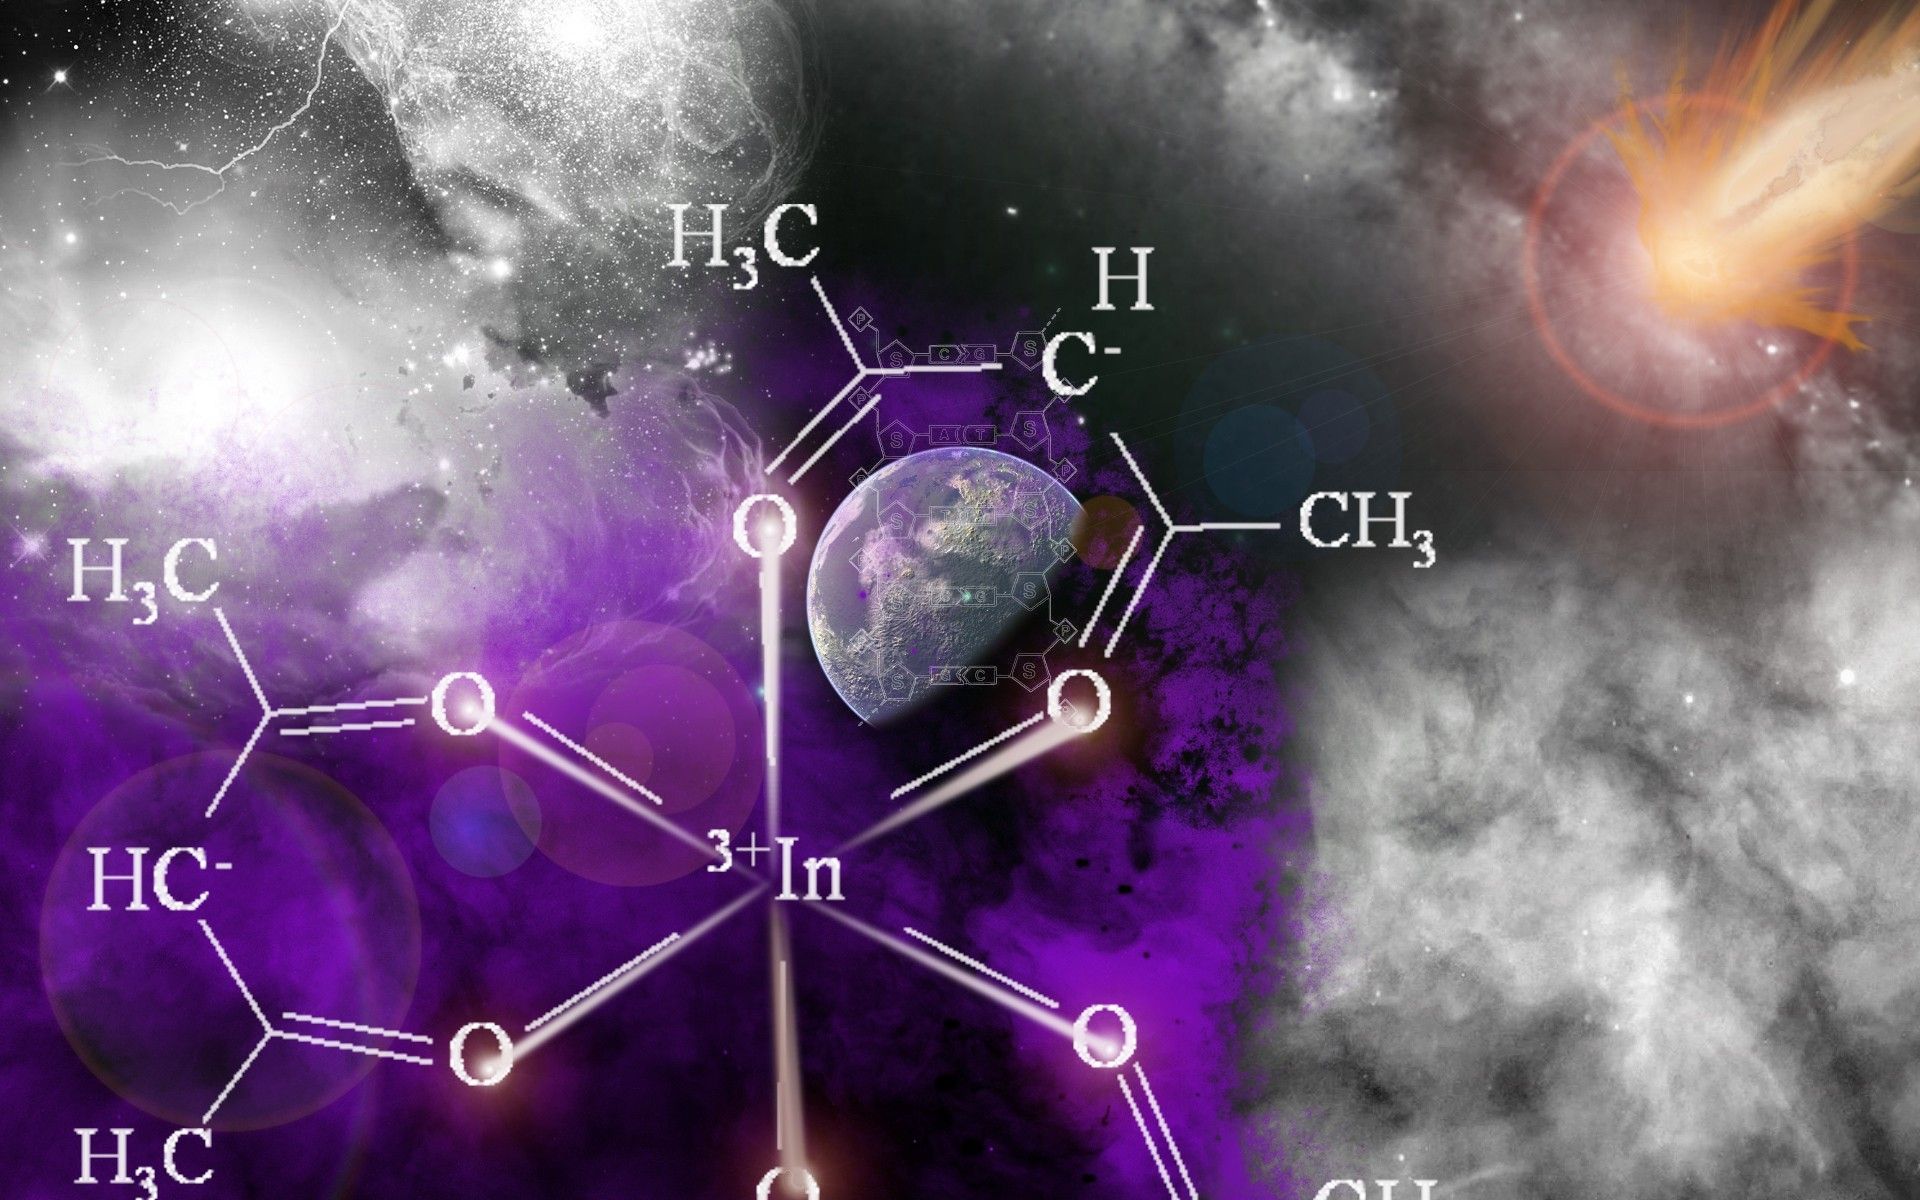 An artistic representation of the chemical structure of glycine, a simple amino acid, against a backdrop of space. - Chemistry